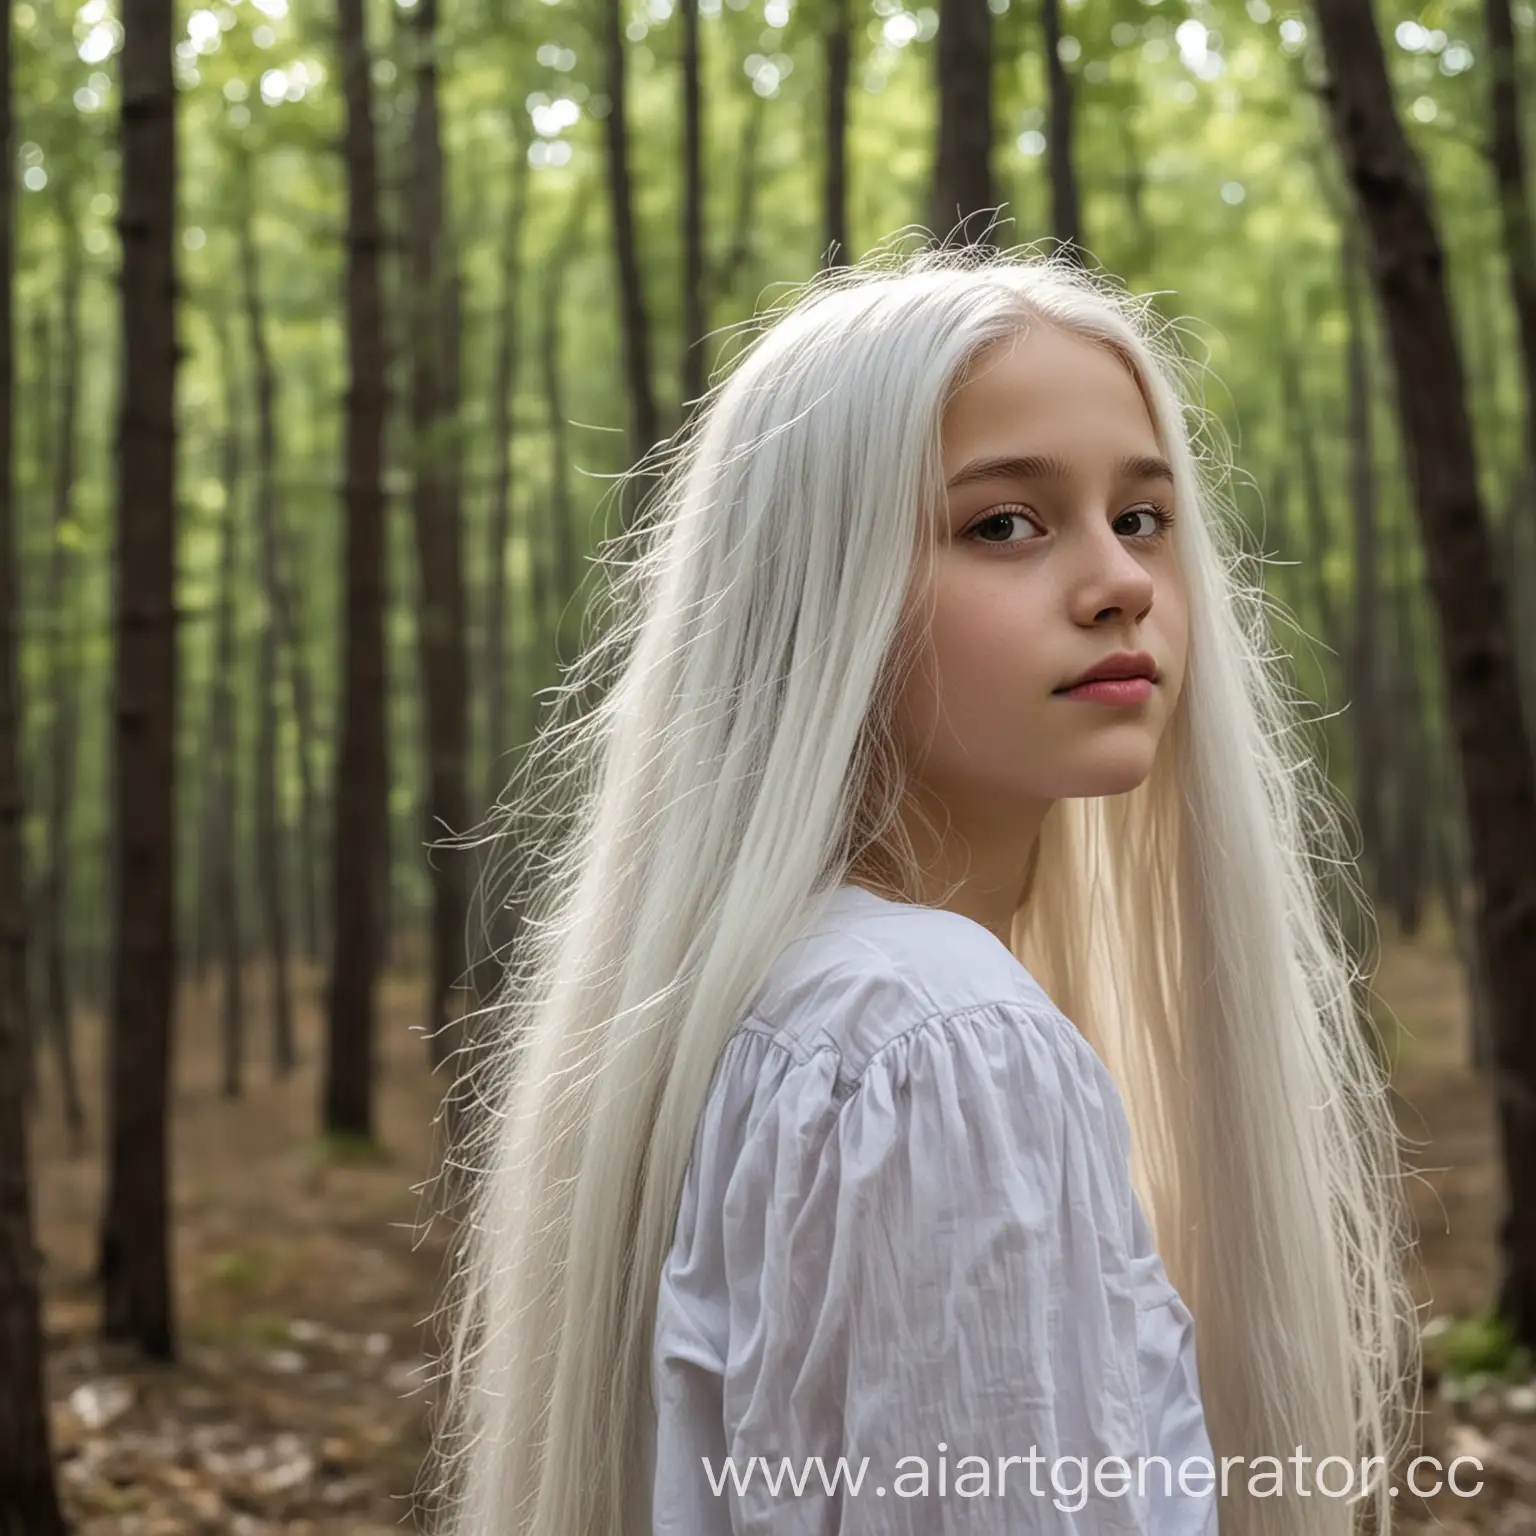 Young-Girl-with-Long-White-Hair-in-Enchanted-Forest